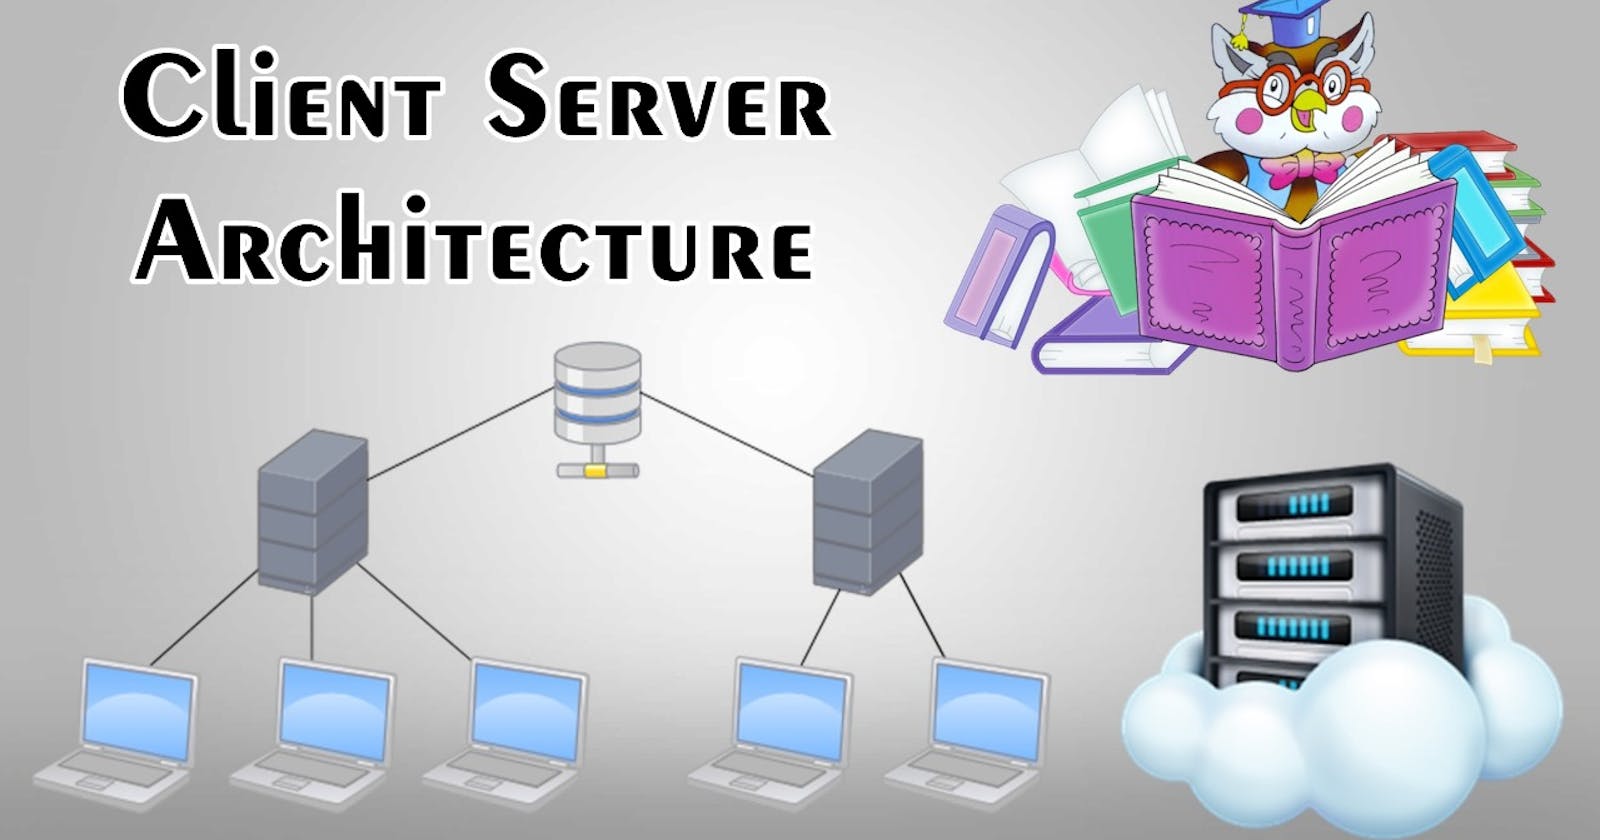 What is client server architecture?